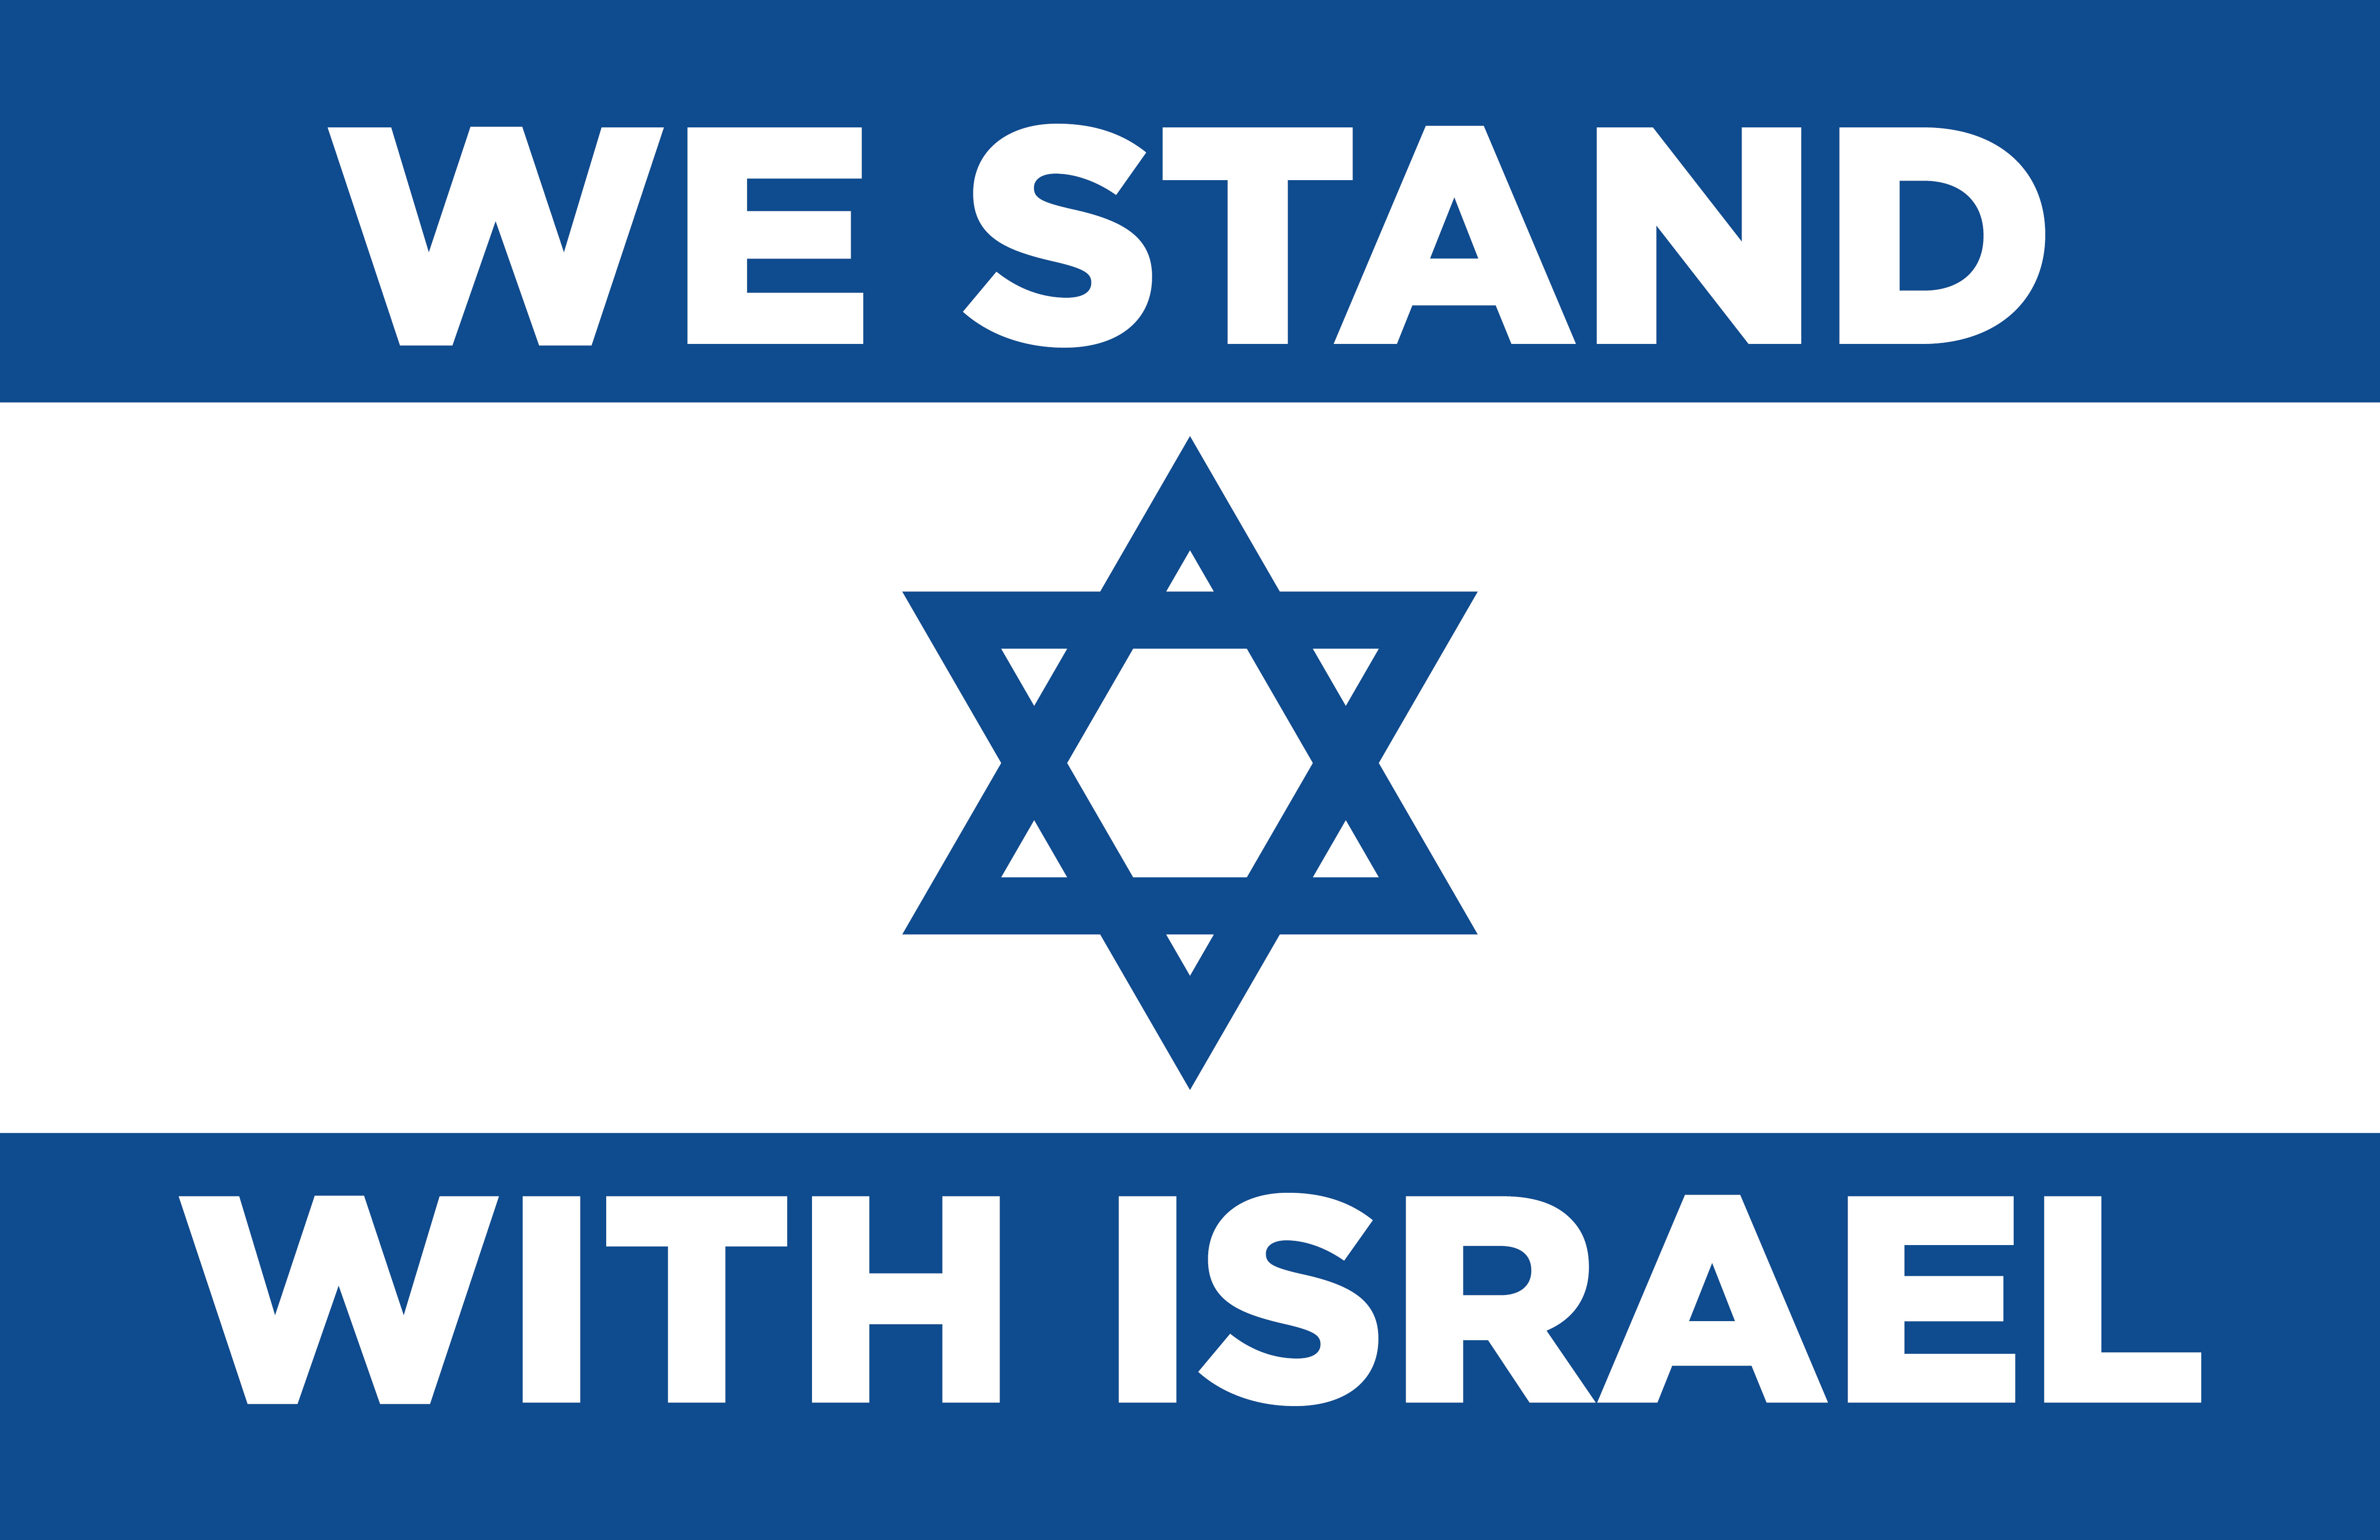 Show your support for Israel